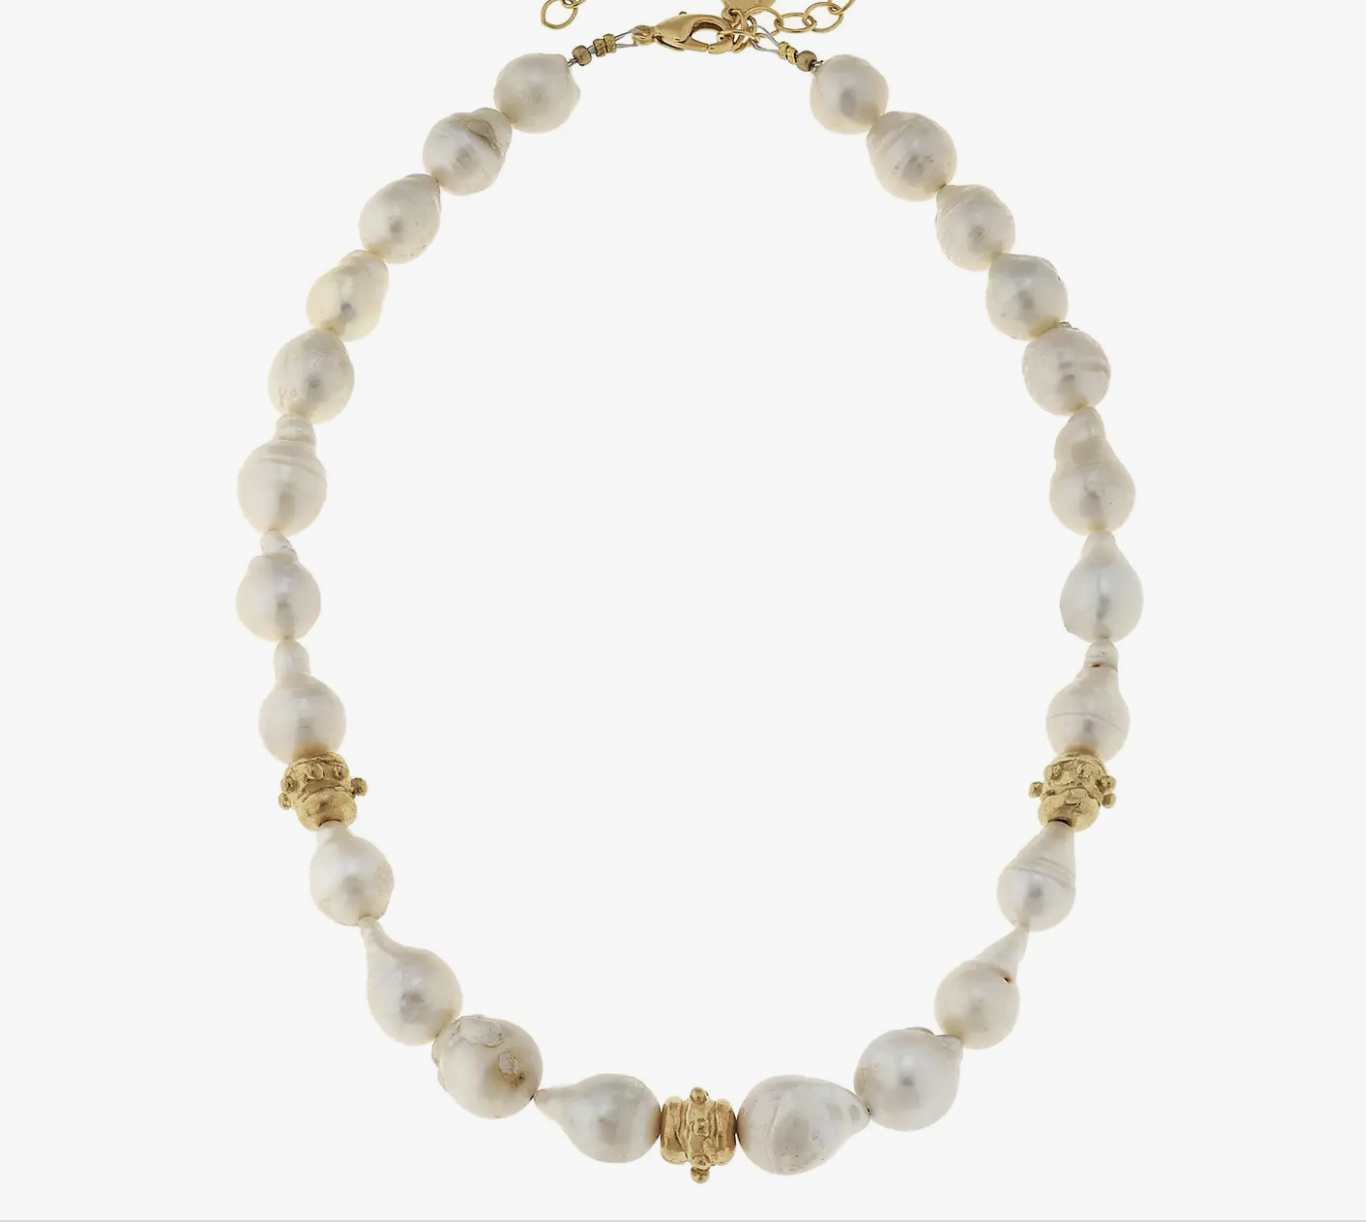 Large Baroque Genuine Freshwater Pearls with Gold Bead Necklace